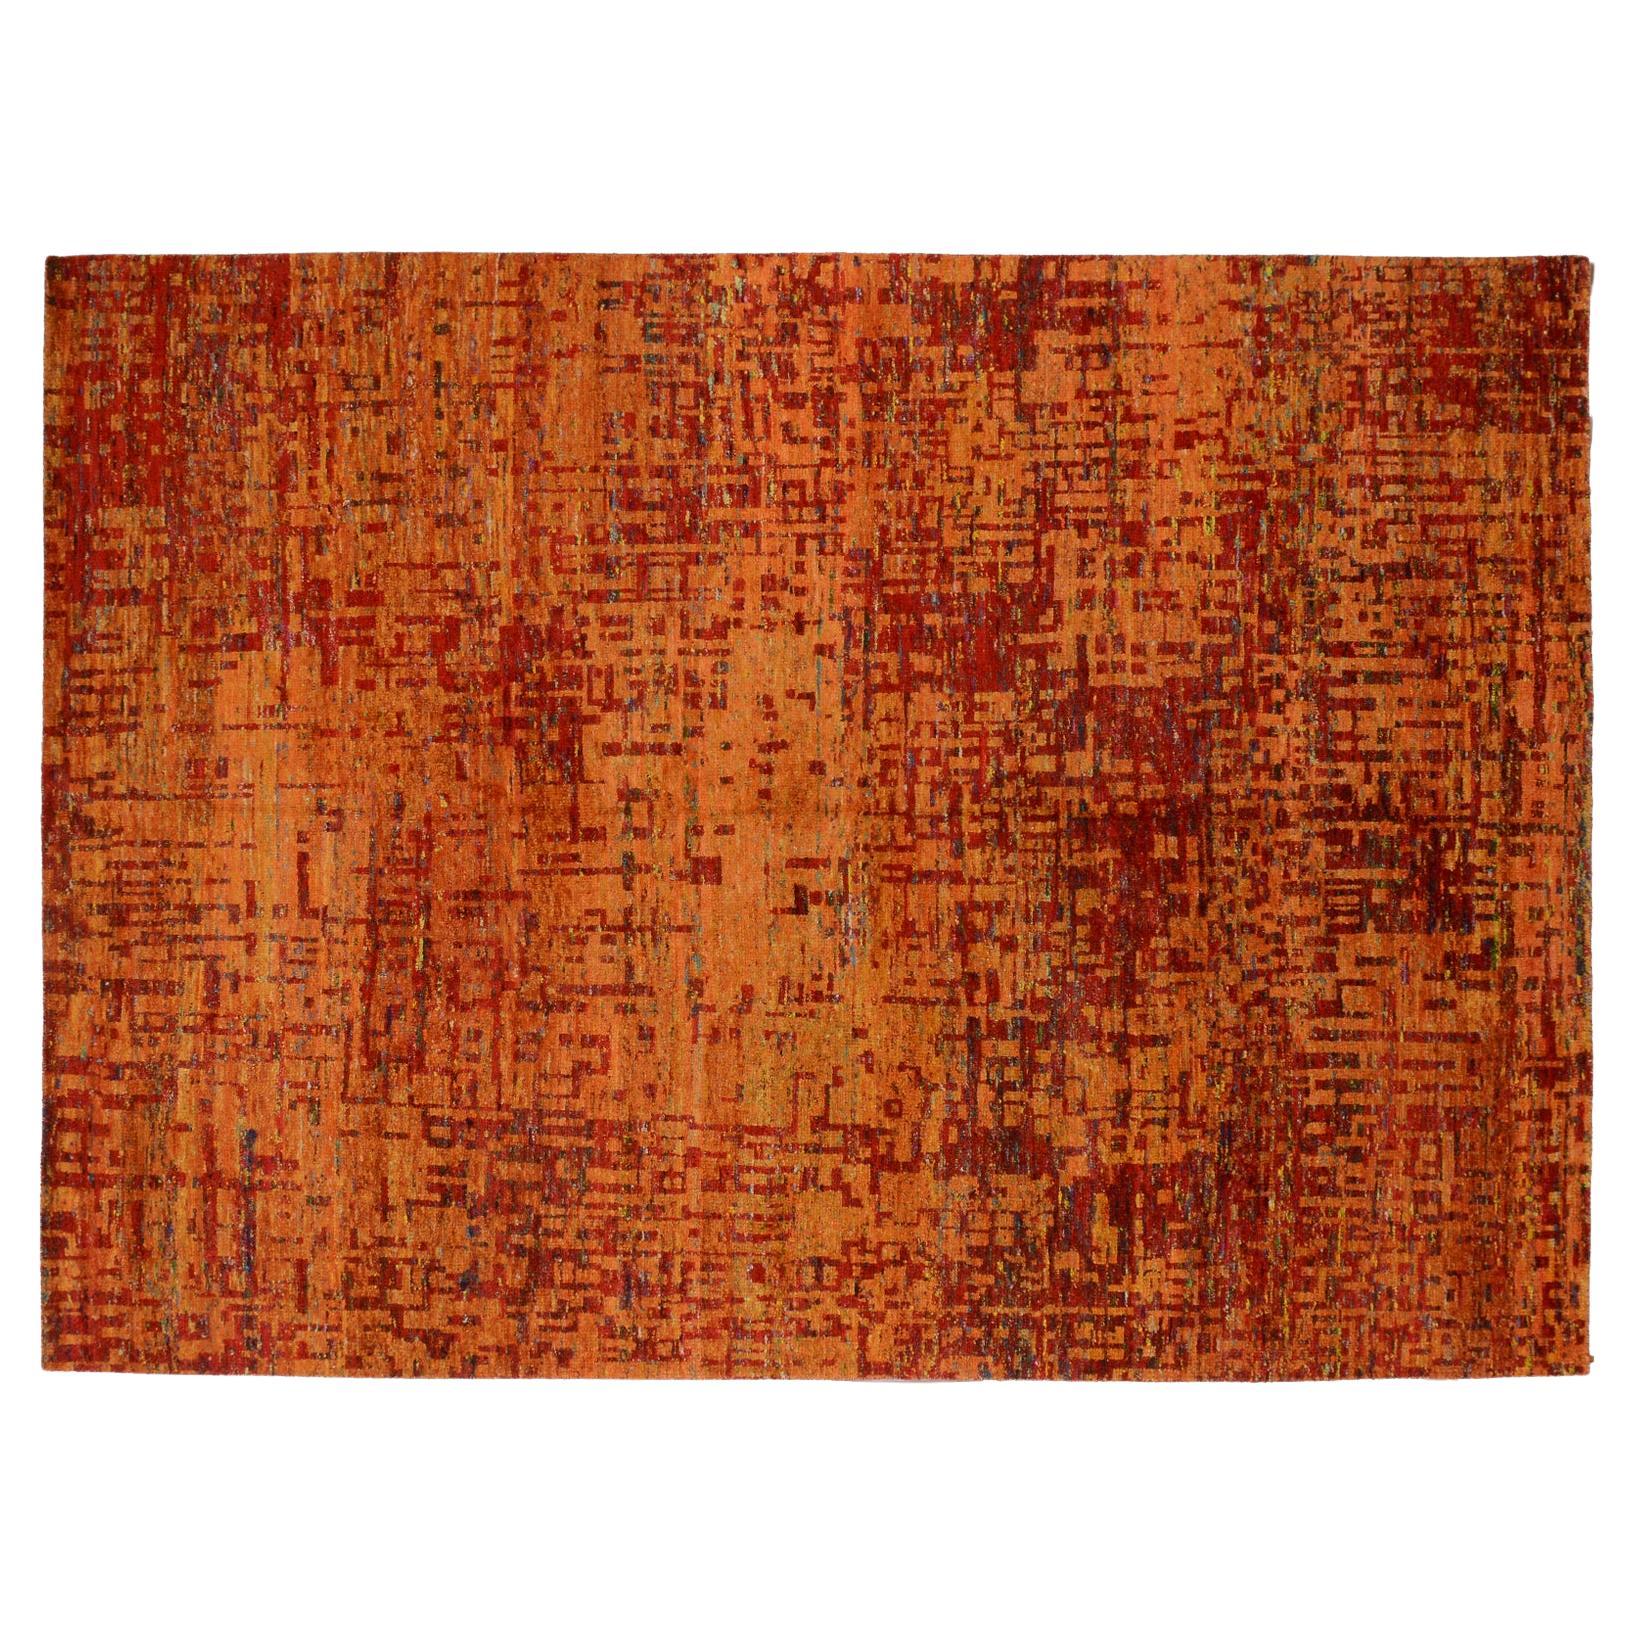 9'x12' Abstract Grunge Design Rug in Reds and Oranges Hue  For Sale